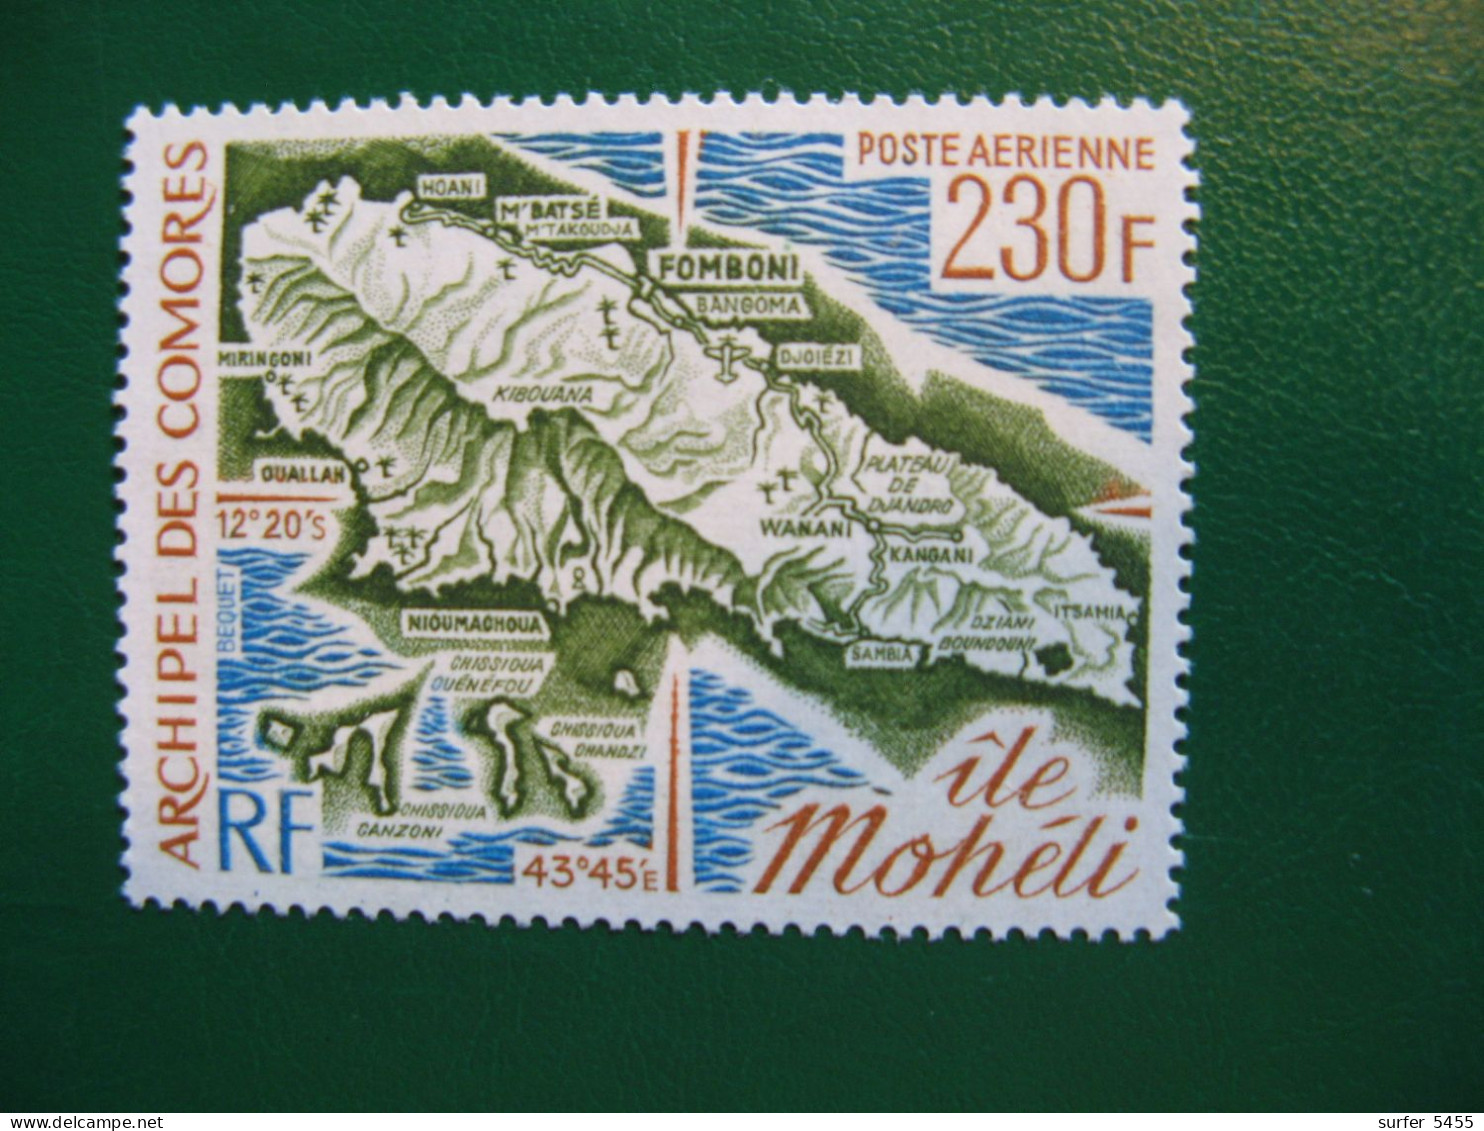 COMORES YVERT POSTE AERIENNE N° 67 TIMBRE NEUF** LUXE - MNH - COTE 15,00 EUROS - Unused Stamps